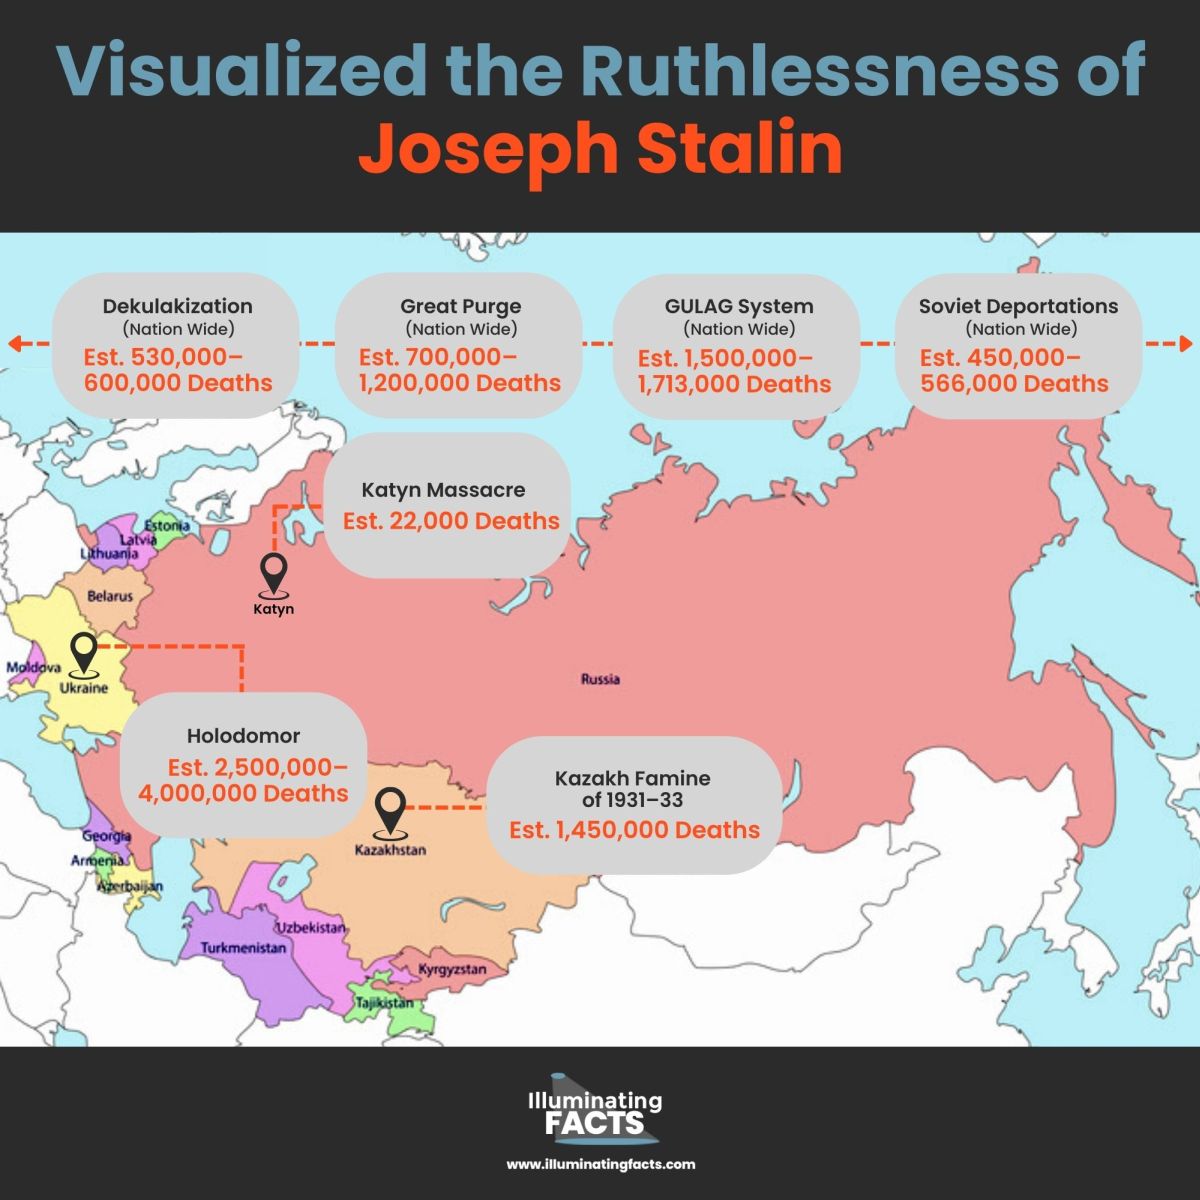 Visualized the Ruthlessness of Joseph Stalin